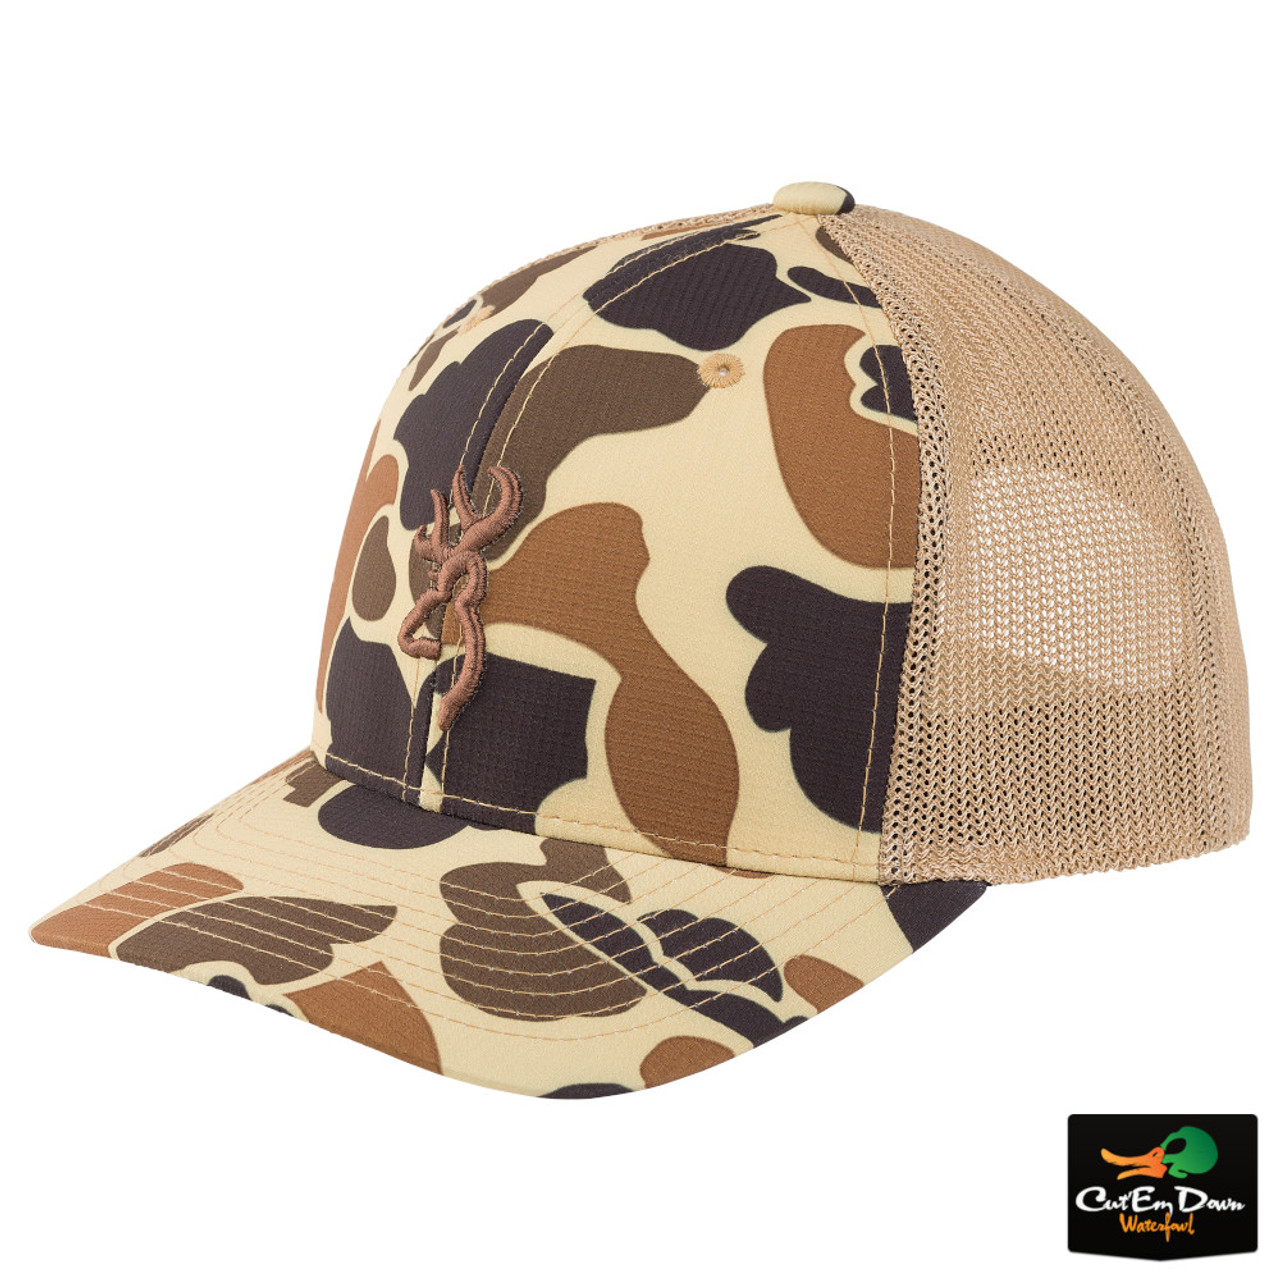 Browning Cupped Up Mesh Cap Camo - Back Vintage Tan